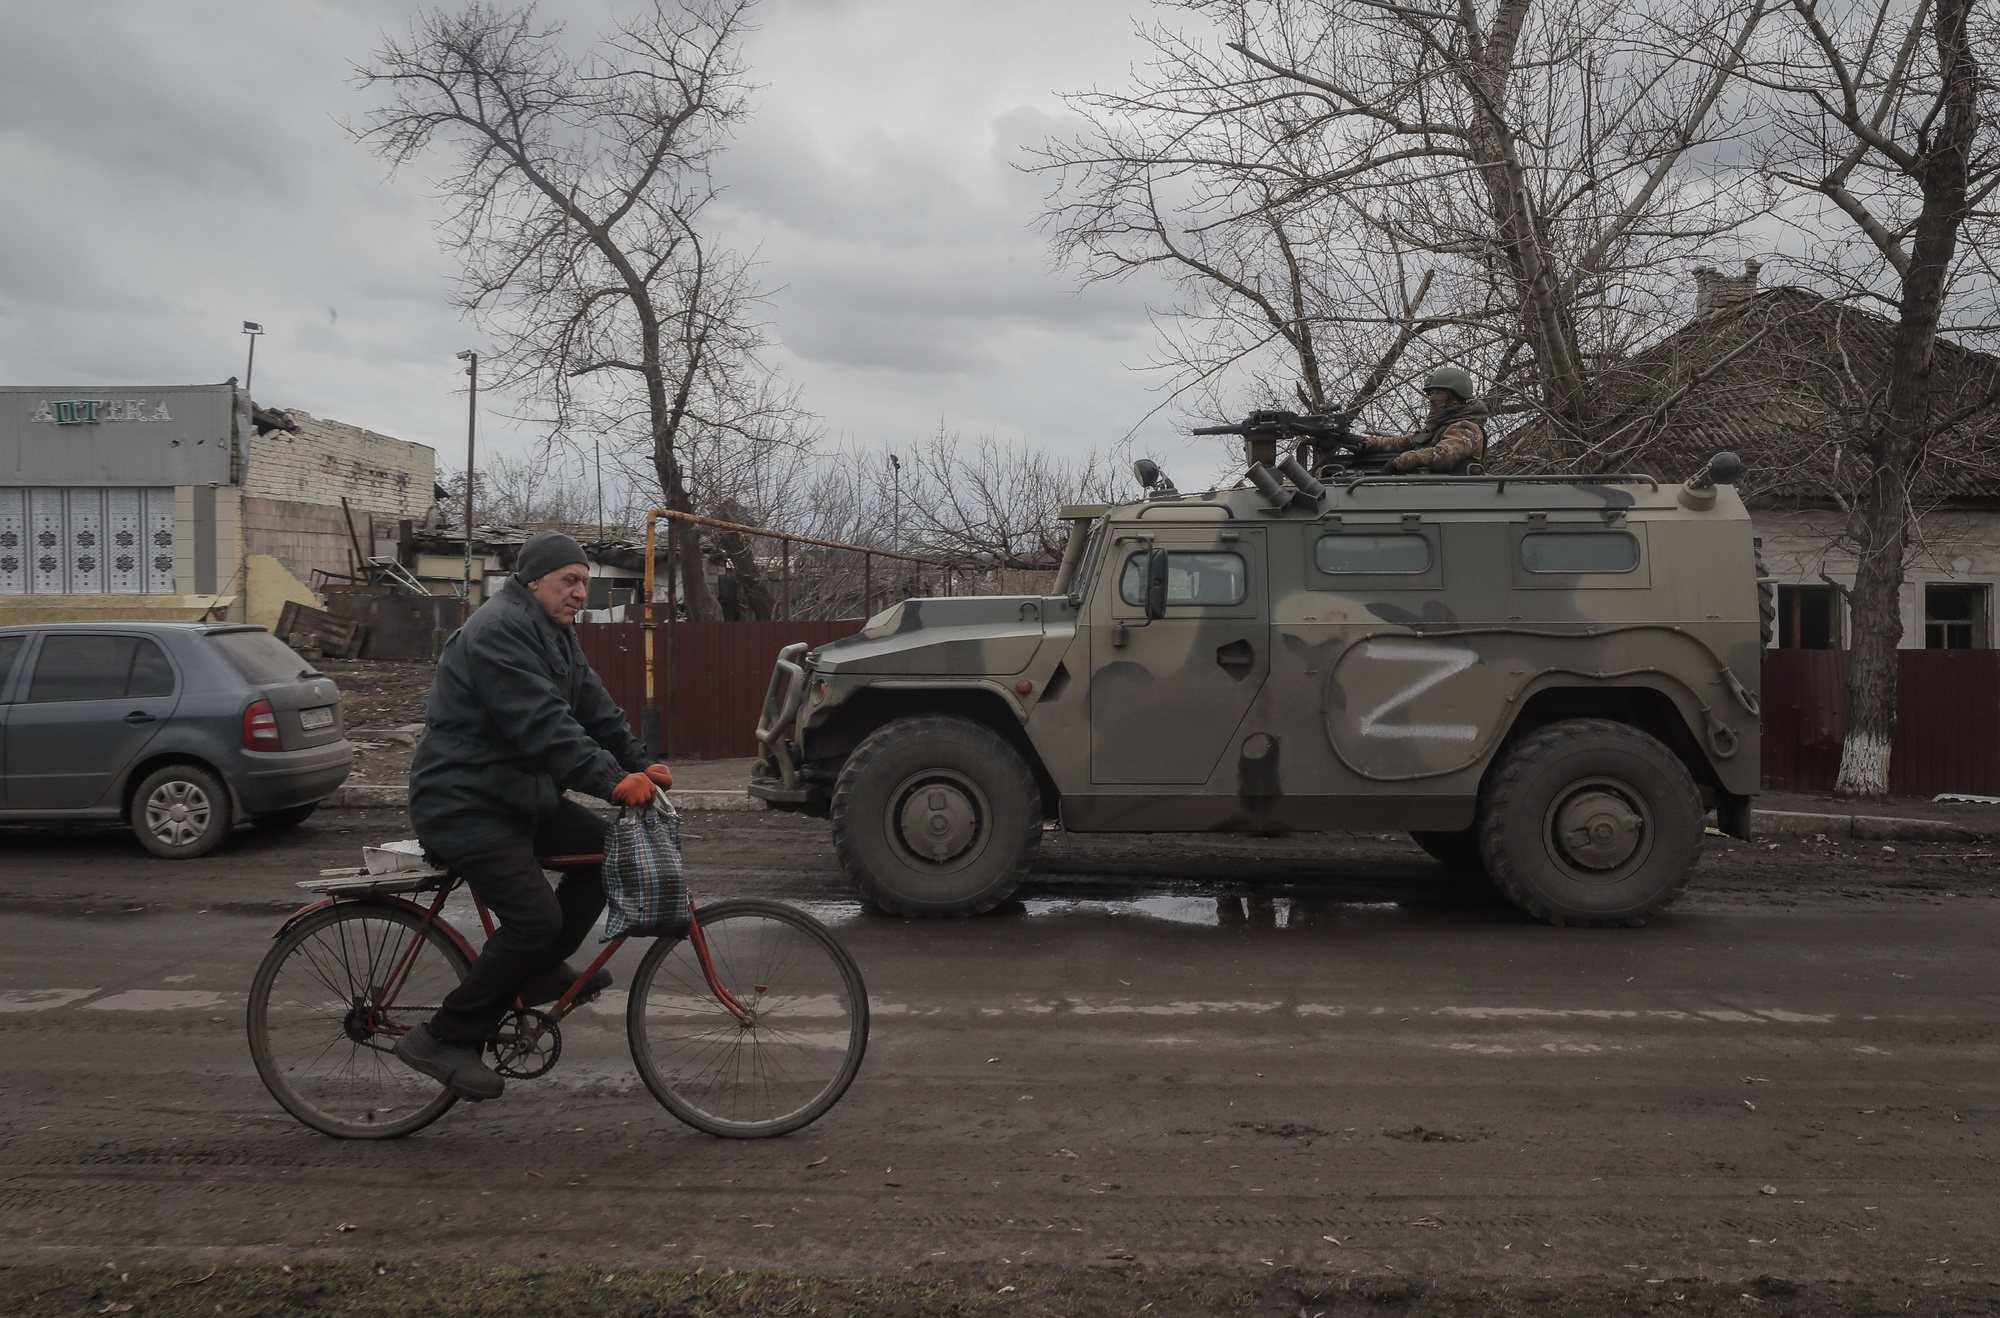 epa09853298 Local man with humanitarian aid bicycling in front of Russian army all-terrain infantry mobility vehicle ‘Tigr’ during food distribution organised by Russian army and militias of self-proclaimed LPR in village Trokhizbenka, Luhansk region, Ukraine, 27 March 2022. Chairman of the Government of the LPR Sergey Kozlov reported that as of March 22, the retreating Kyiv (Kiev) security forces had blown up 22 bridges, but the Republic would restore them. Russia will assist in the restoration and construction of infrastructure in the Republic. On 24 February Russian troops had entered Ukrainian territory in what the Russian president declared a &#039;special military operation&#039;, resulting in fighting and destruction in the country, a huge flow of refugees, and multiple sanctions against Russia. The letter Z has been used by Russian forces as an identifying sign on their vehicles in Ukraine.  EPA/SERGEI ILNITSKY